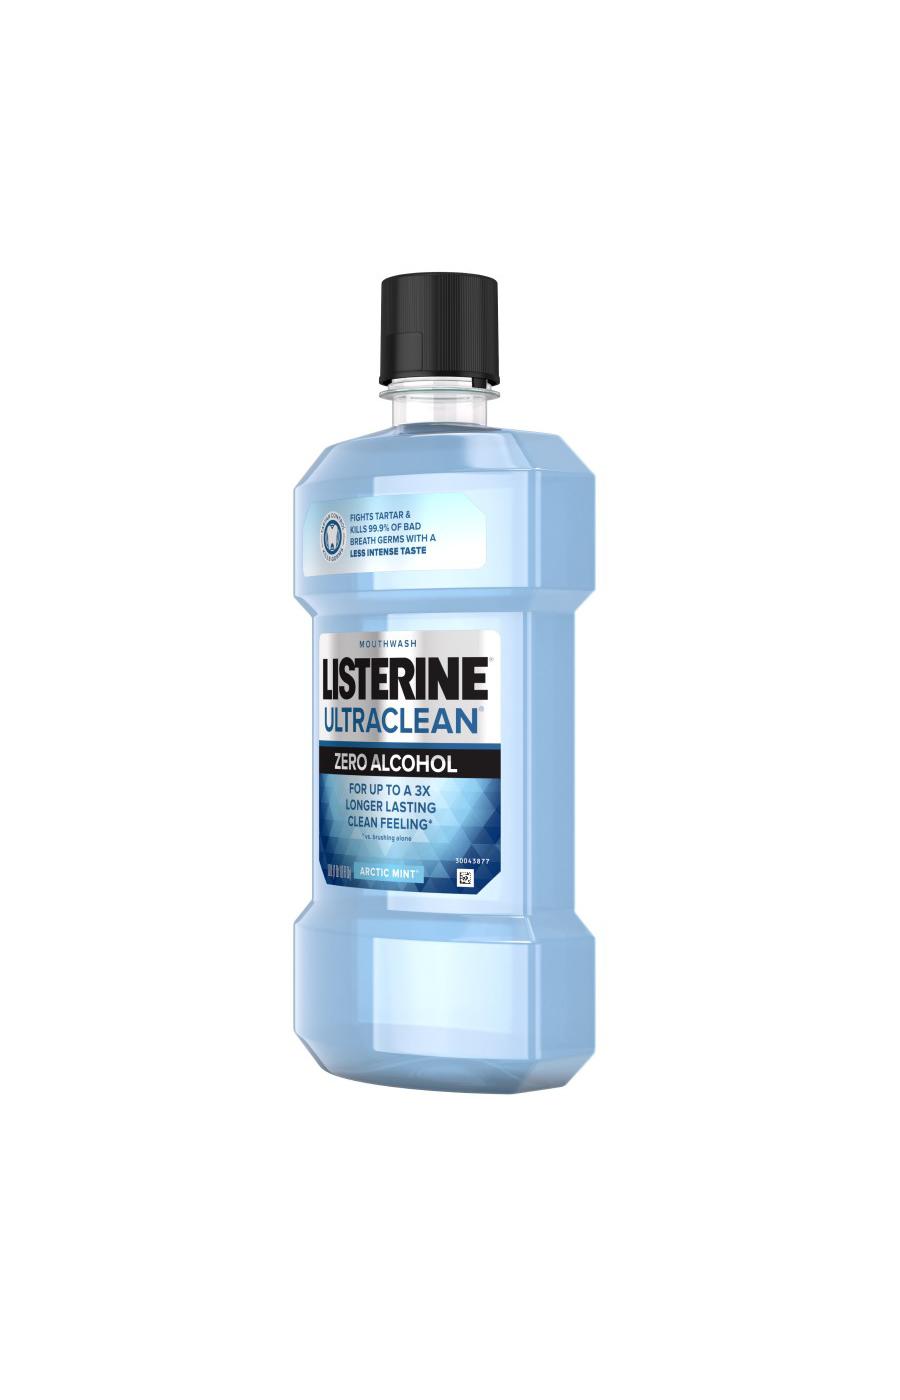 Listerine Ultraclean Zero Alcohol Mouthwash - Arctic Mint; image 4 of 5